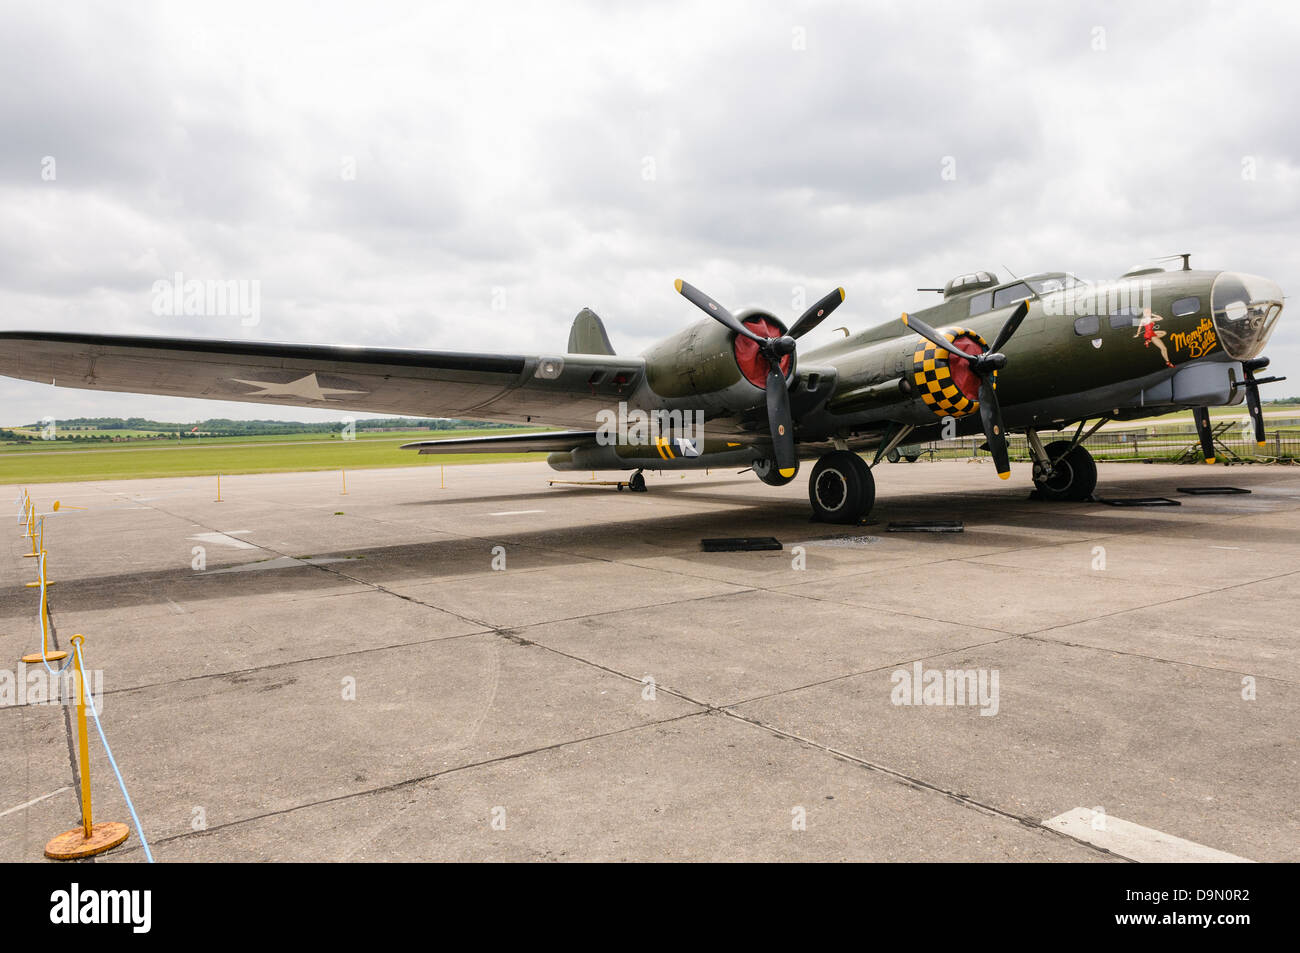 B-17G Flying Fortress bomber "Sally B", one of three aircraft used in the 1990 film "Memphis Belle" parked at Duxford Airfield, and the last airworthy Stock Photo